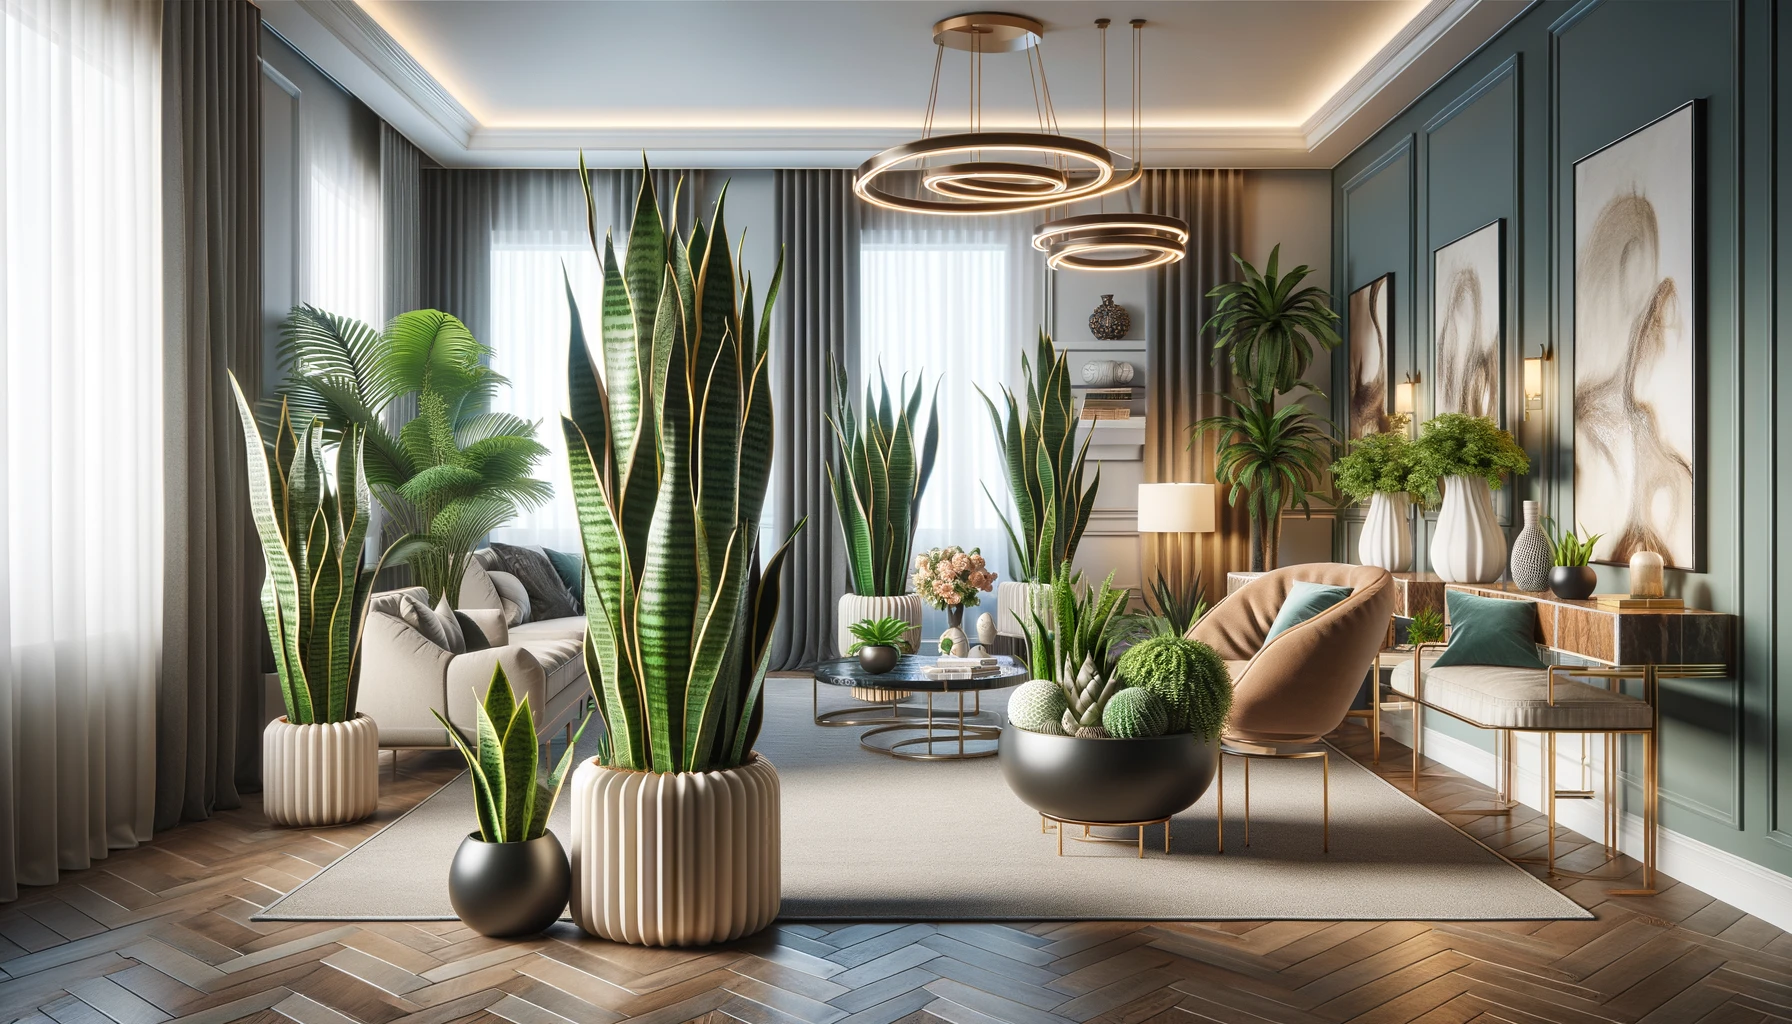 Hyper-realistic image of various succulent snake plants in elegant pots, strategically placed in a luxurious living room with modern decor, stylish furniture, and ambient lighting. The distinctive stiff, upright leaves of the snake plants add a touch of lush greenery to the sophisticated environment, enhancing the aesthetic appeal of the space.